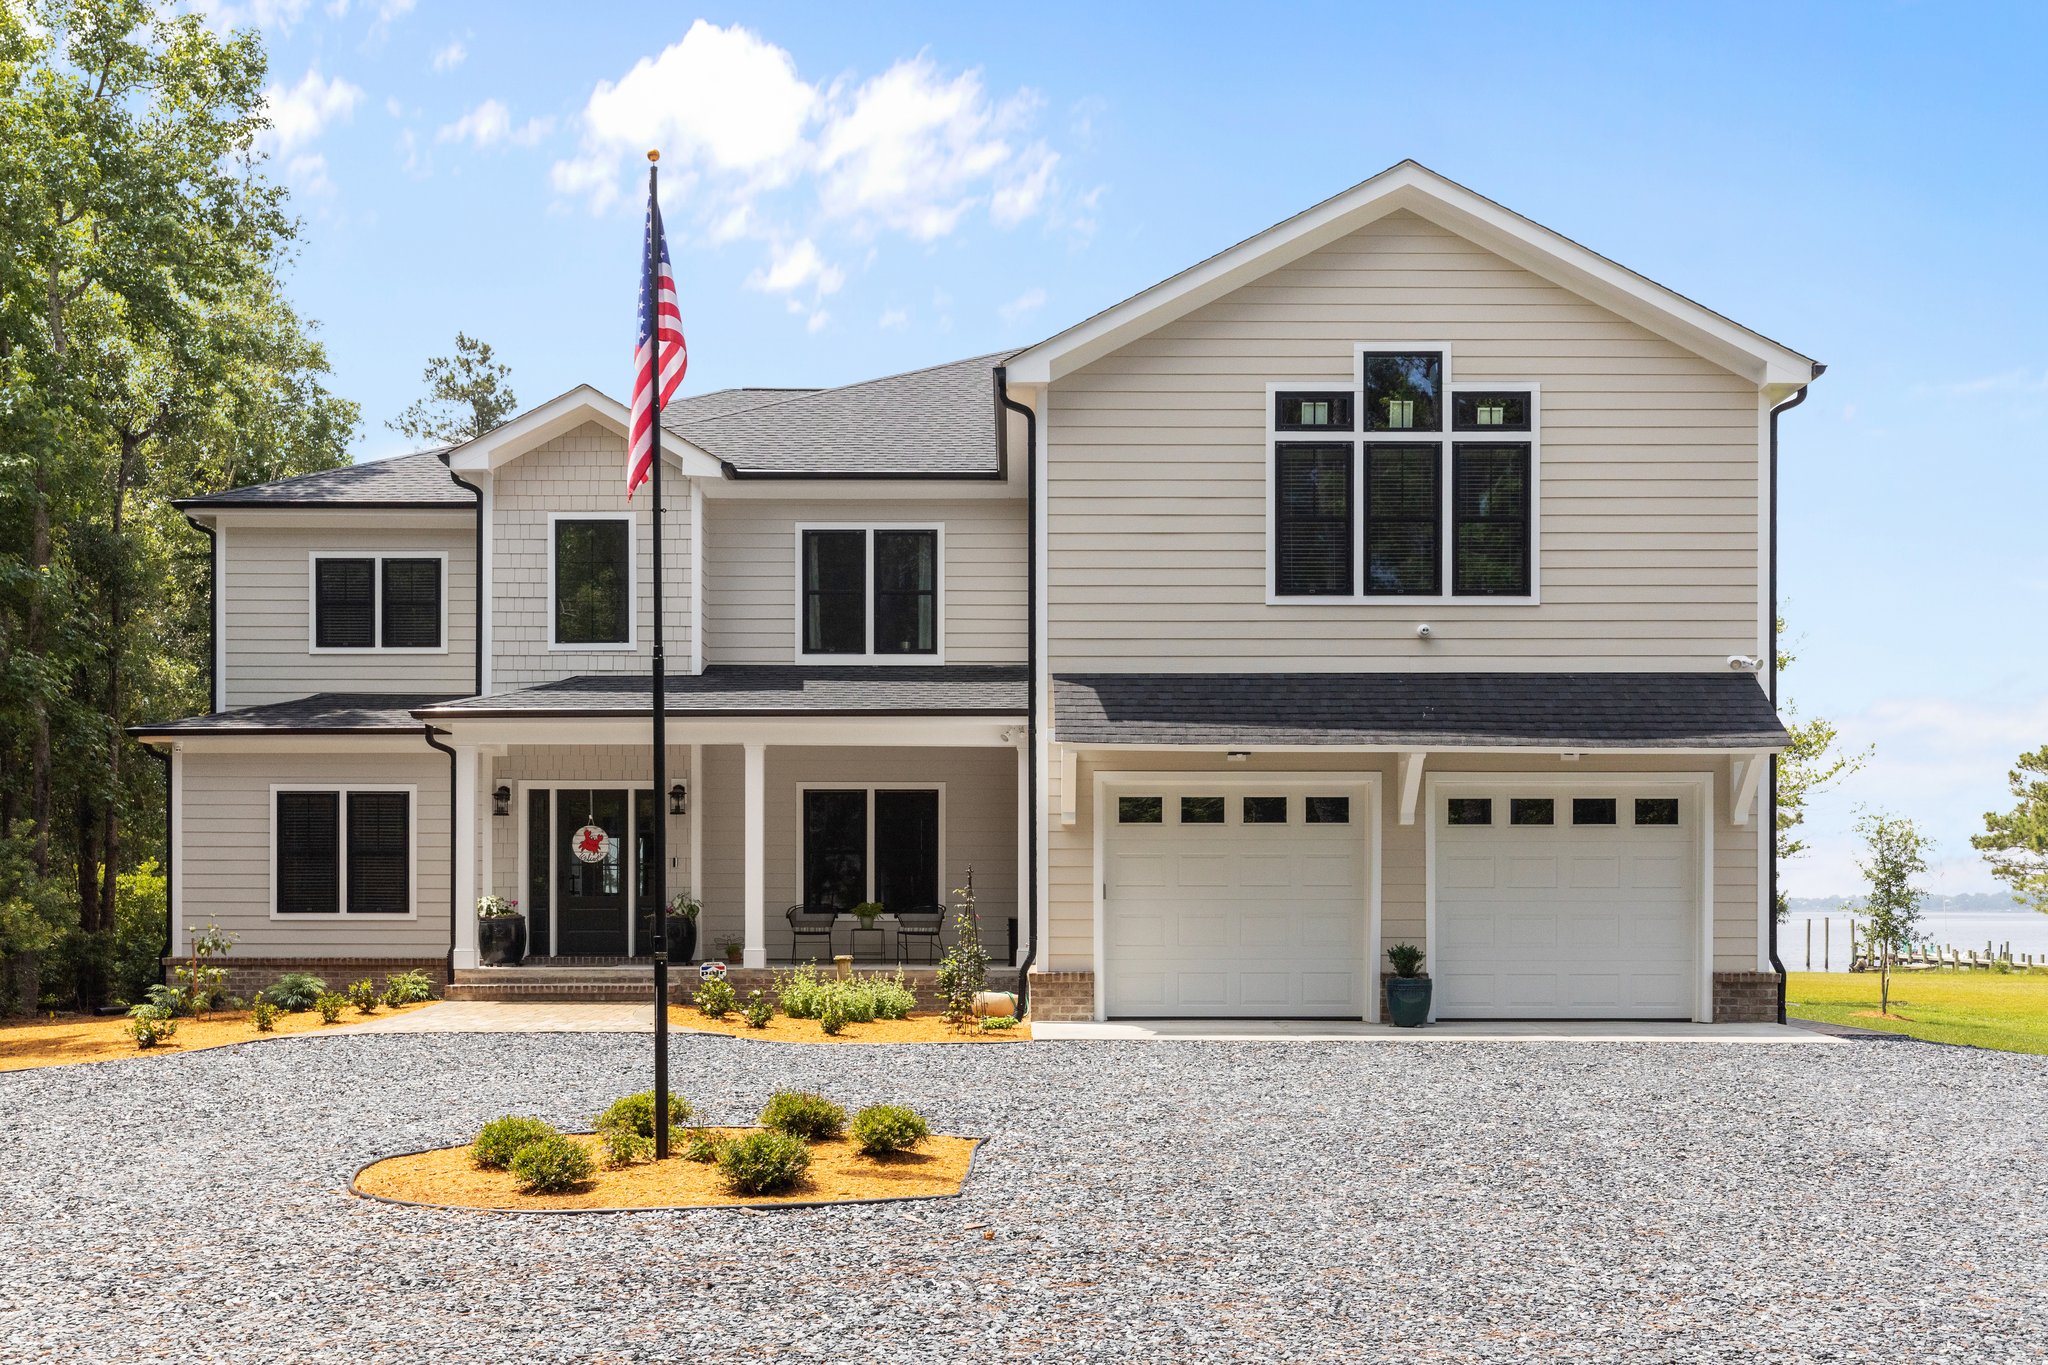 Photo of front view of home with 2 car garage and American flag in round about driveway.